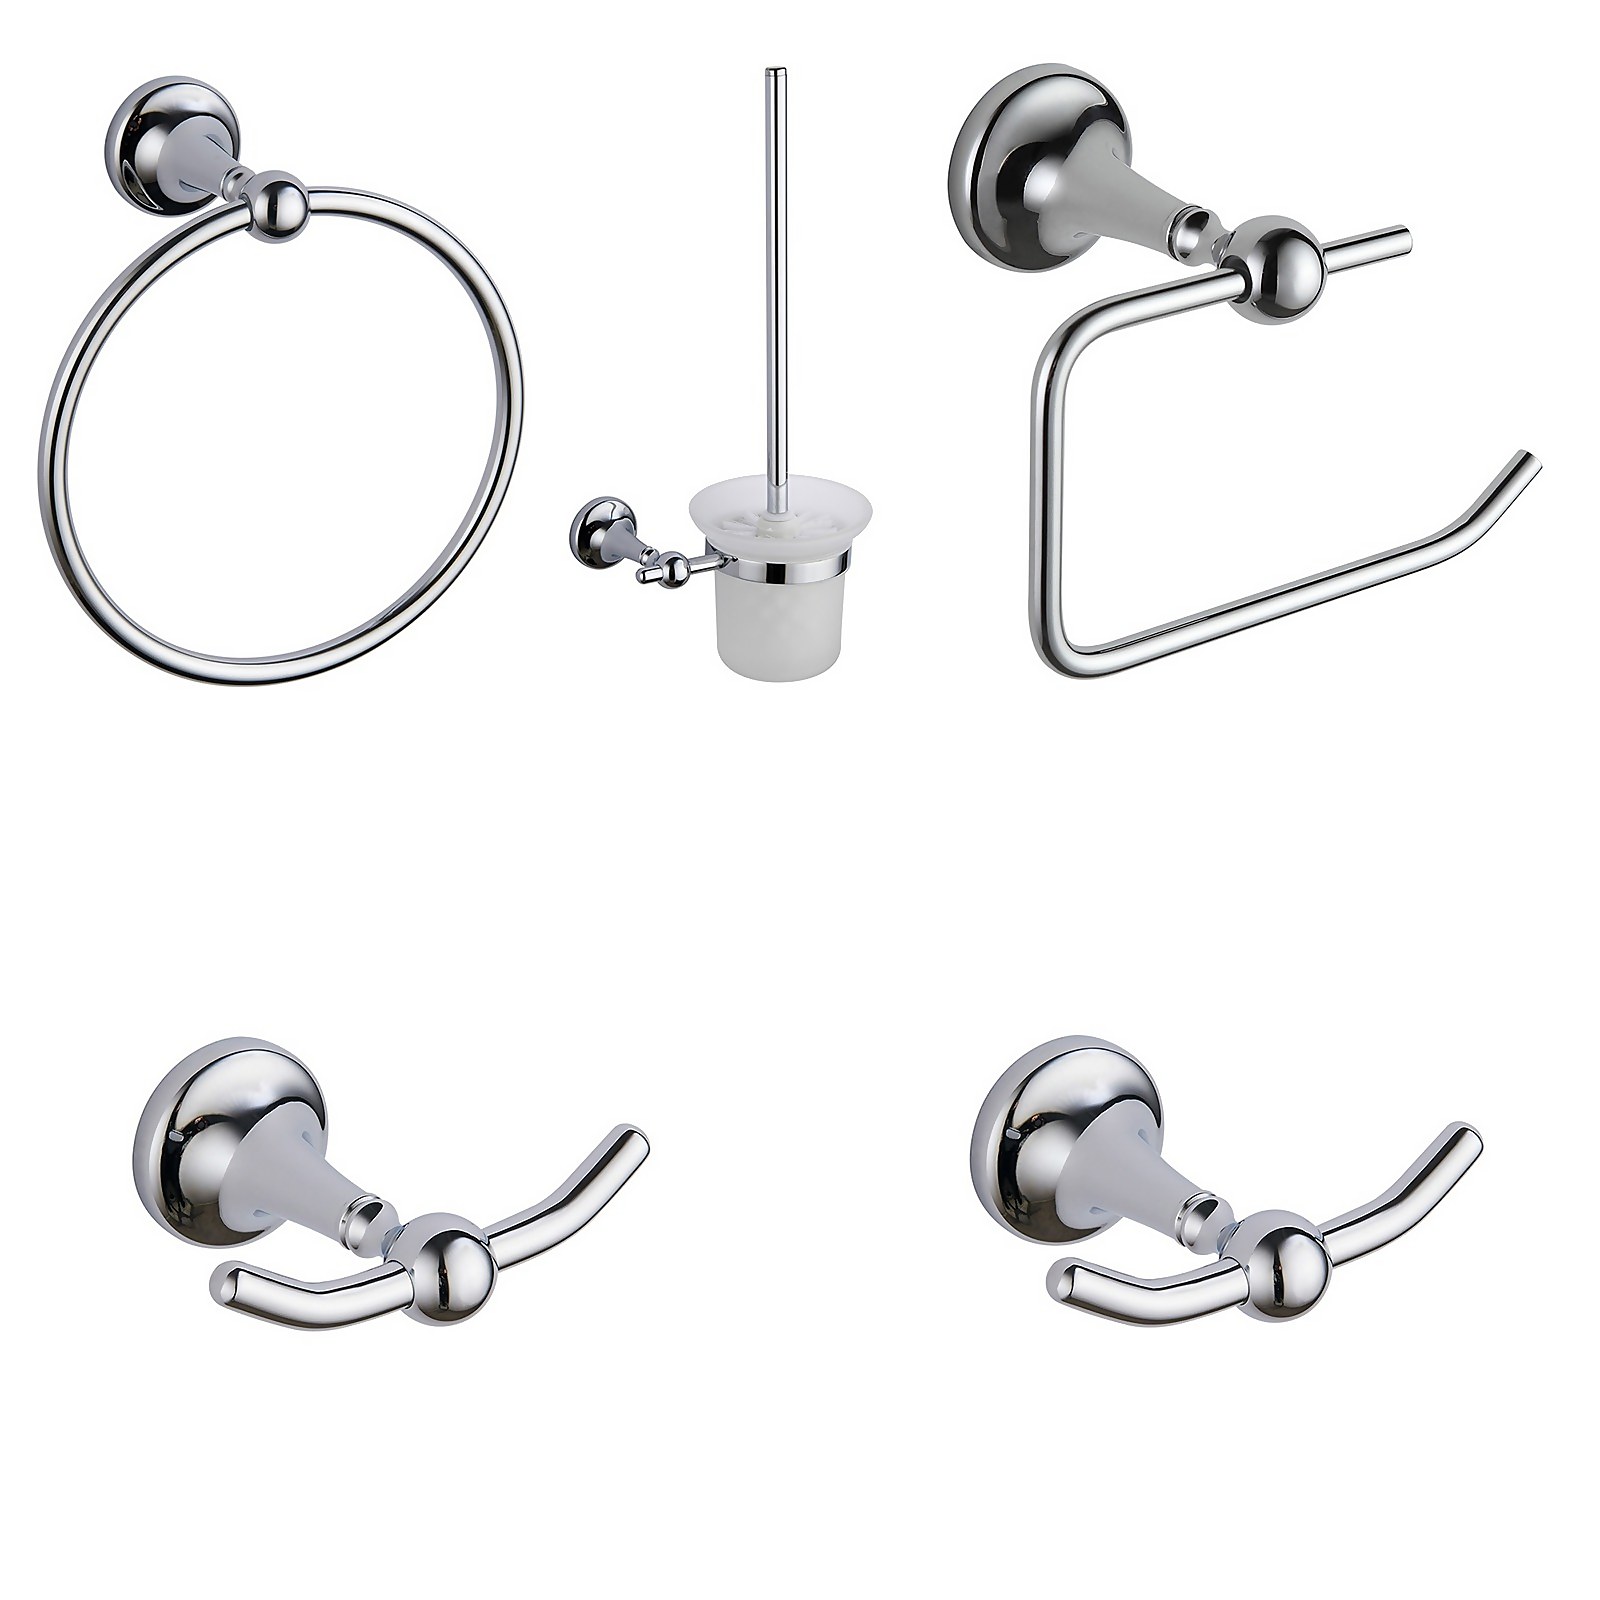 Photo of Traditional 5 Piece Wall Mounted Bathroom Accessories Set